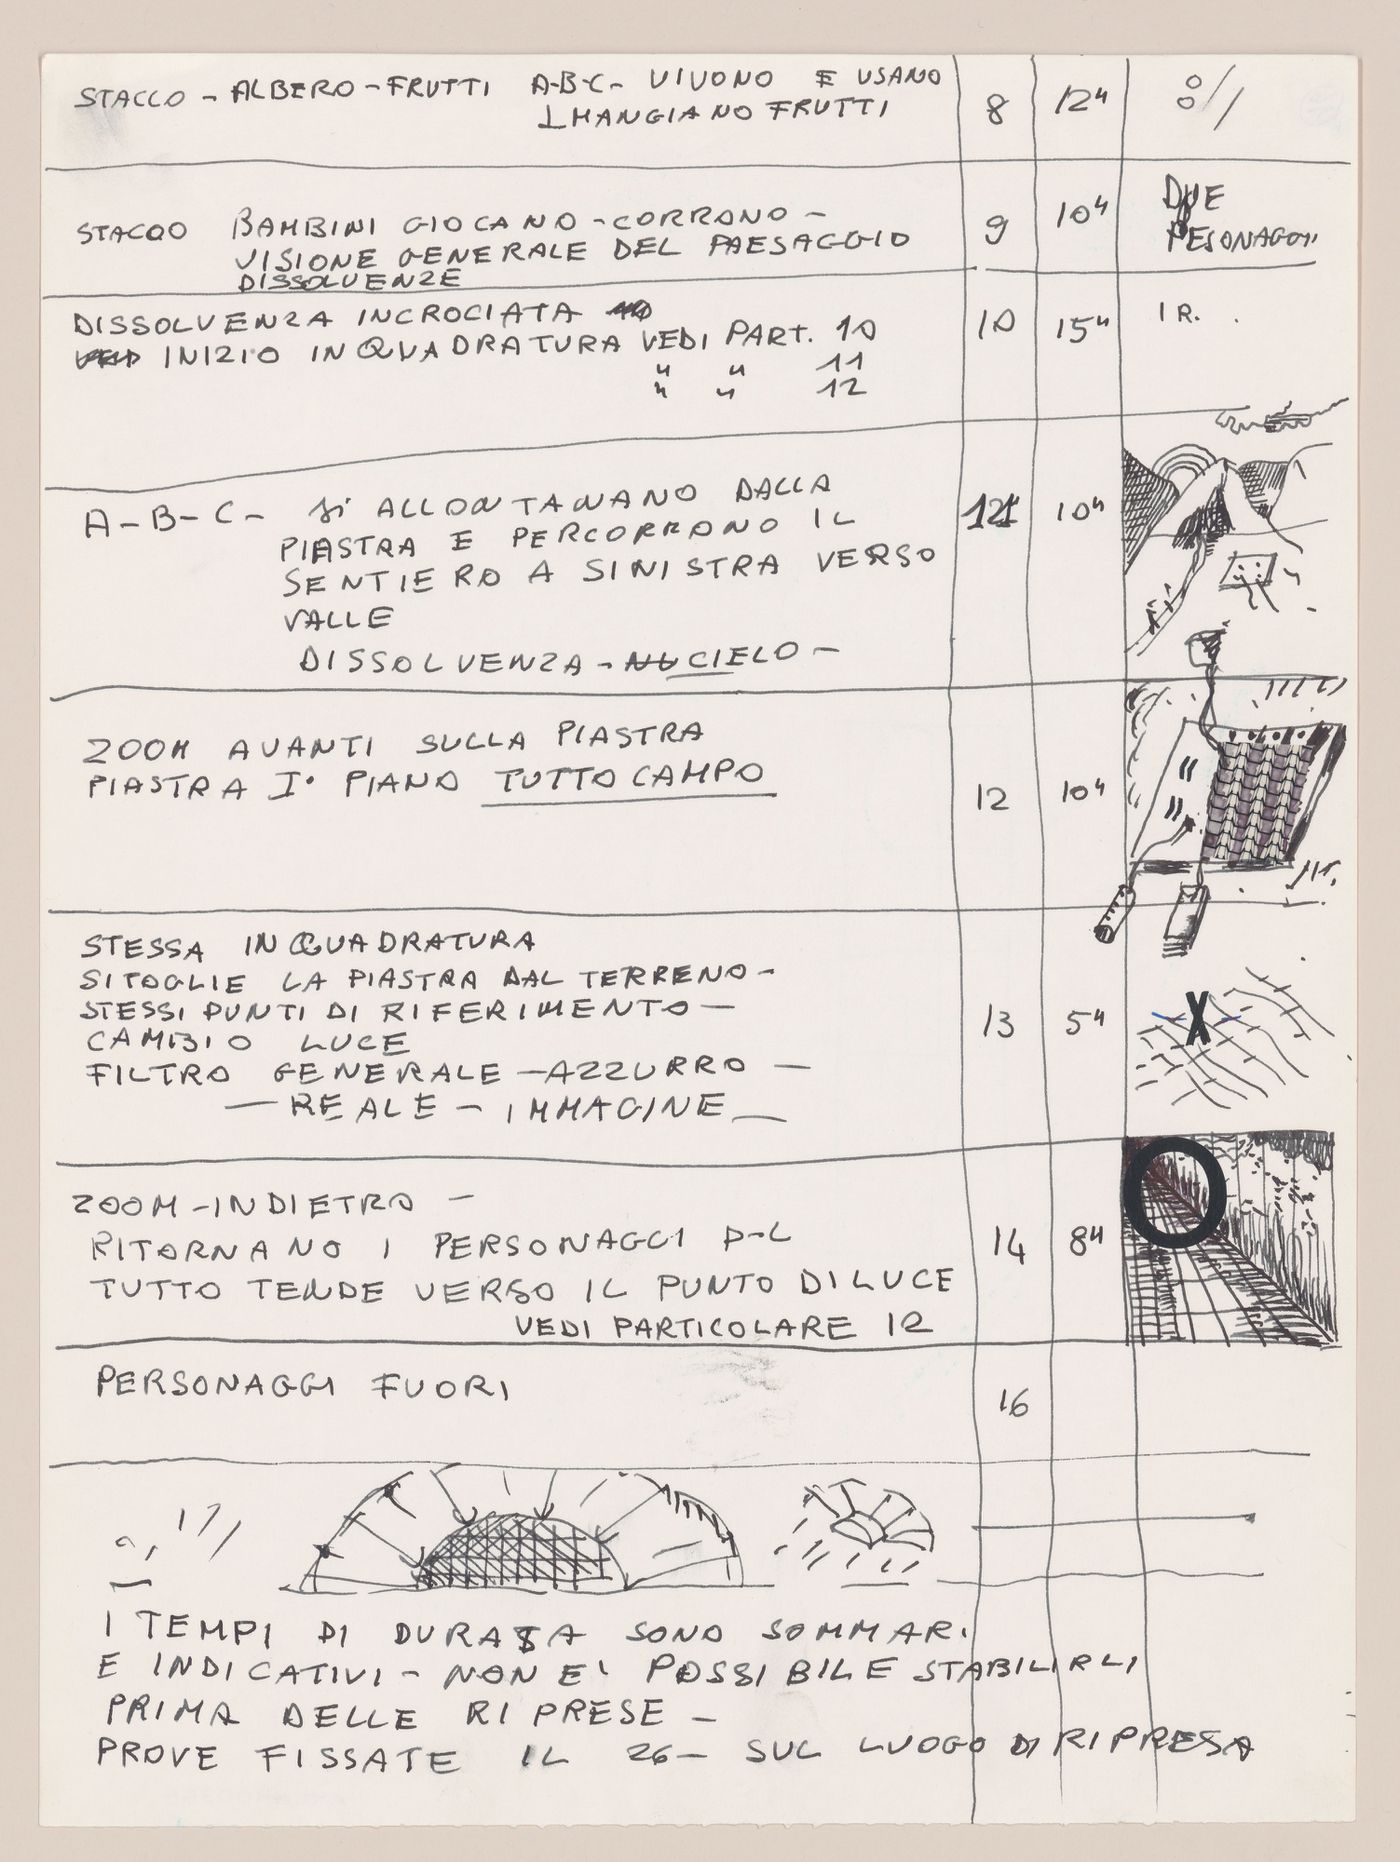 Page 2 of a storyboard with filming instructions, techniques, and durations for various scenes for Supersuperficie [Supersurface]